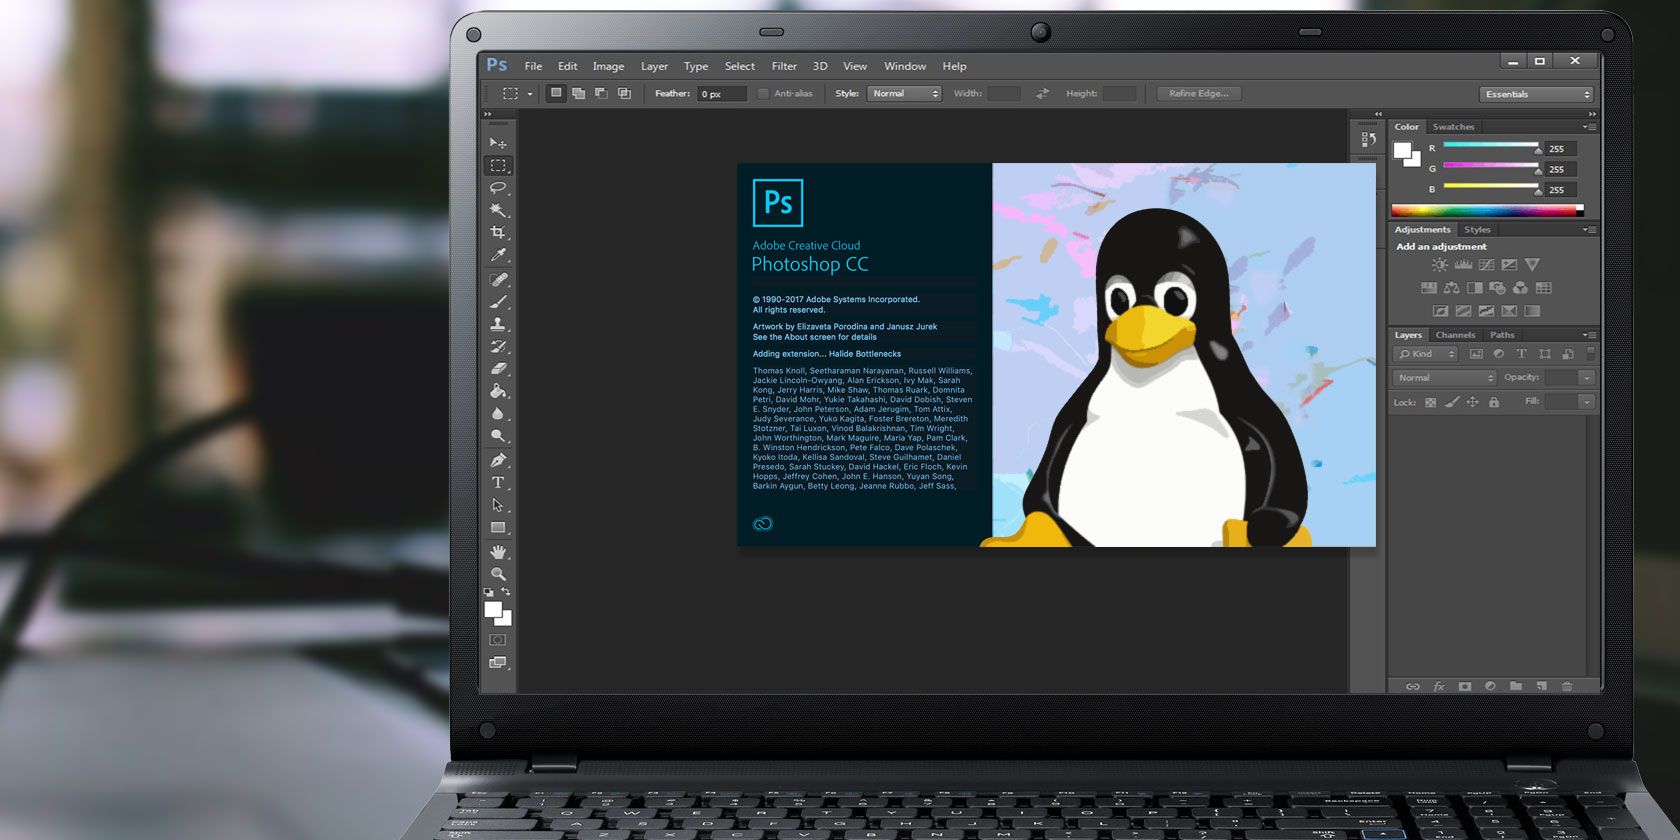 How to Install Adobe Photoshop on Linux | MakeUseOf